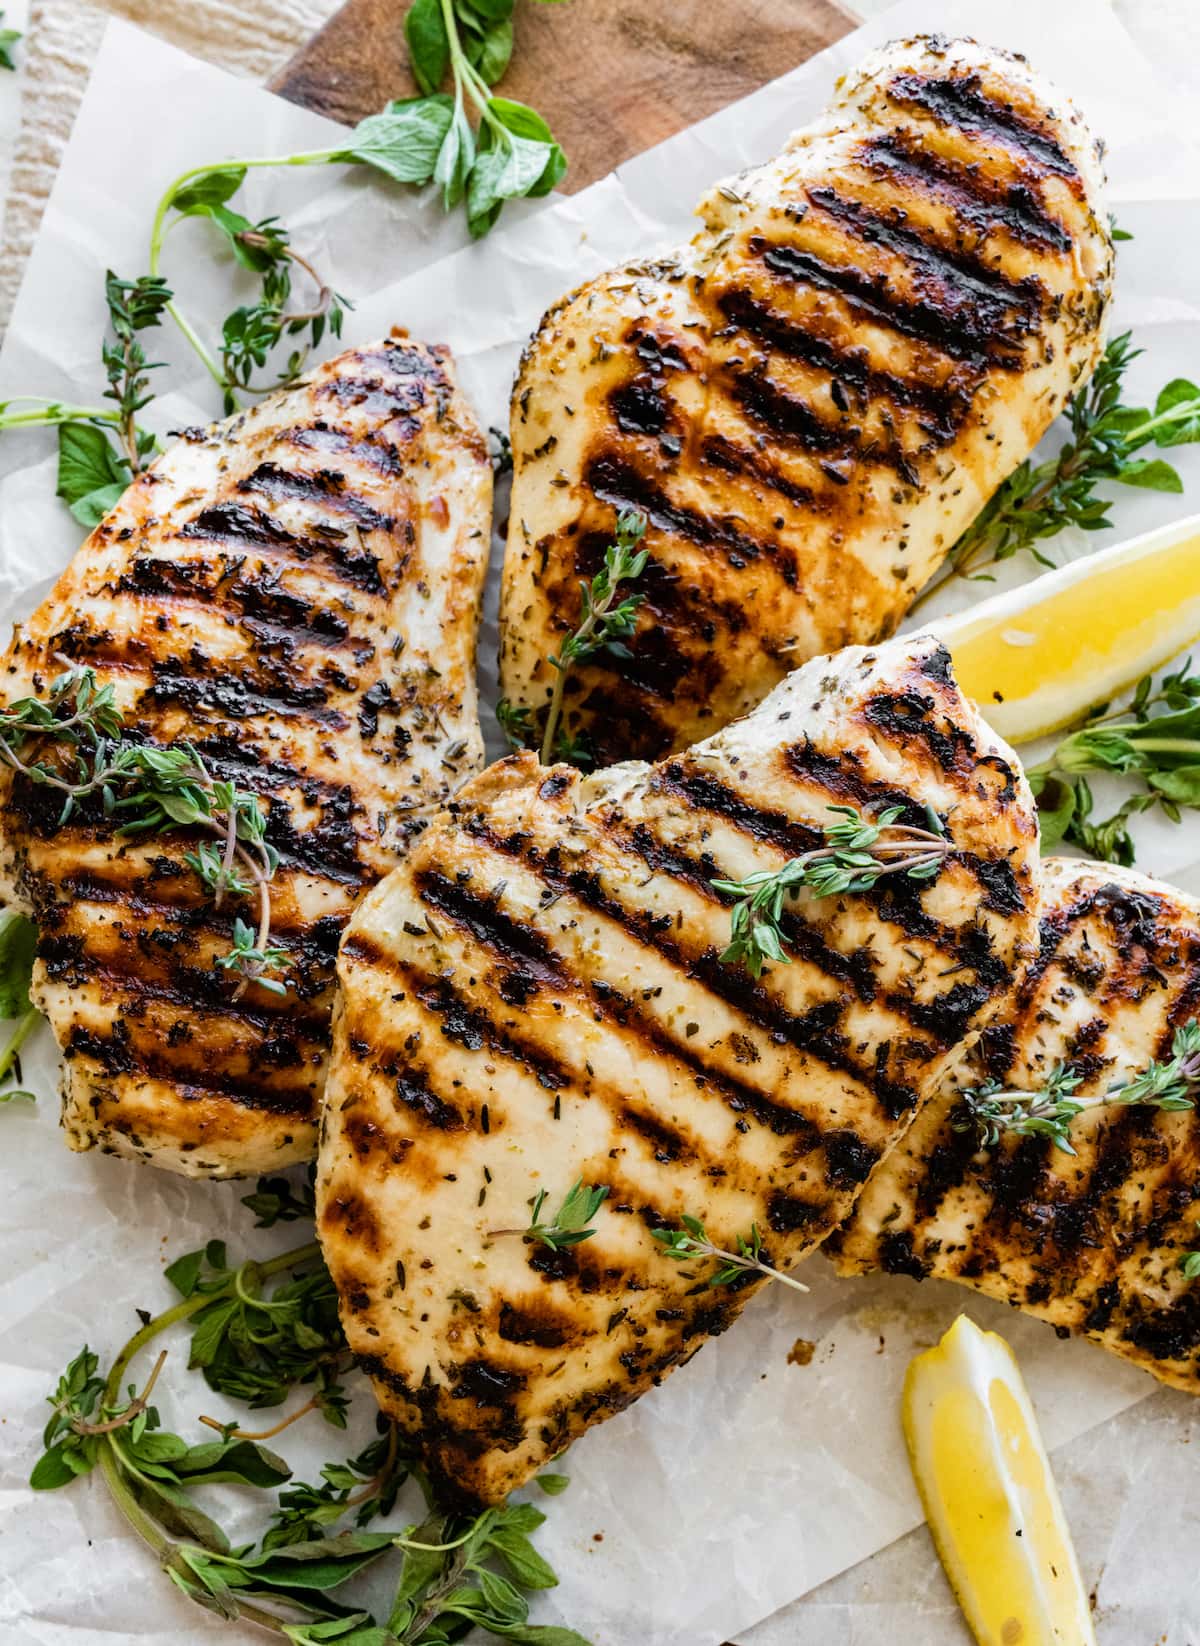 Four grilled chicken breasts on parchment paper with fresh herbs and lemon slices.